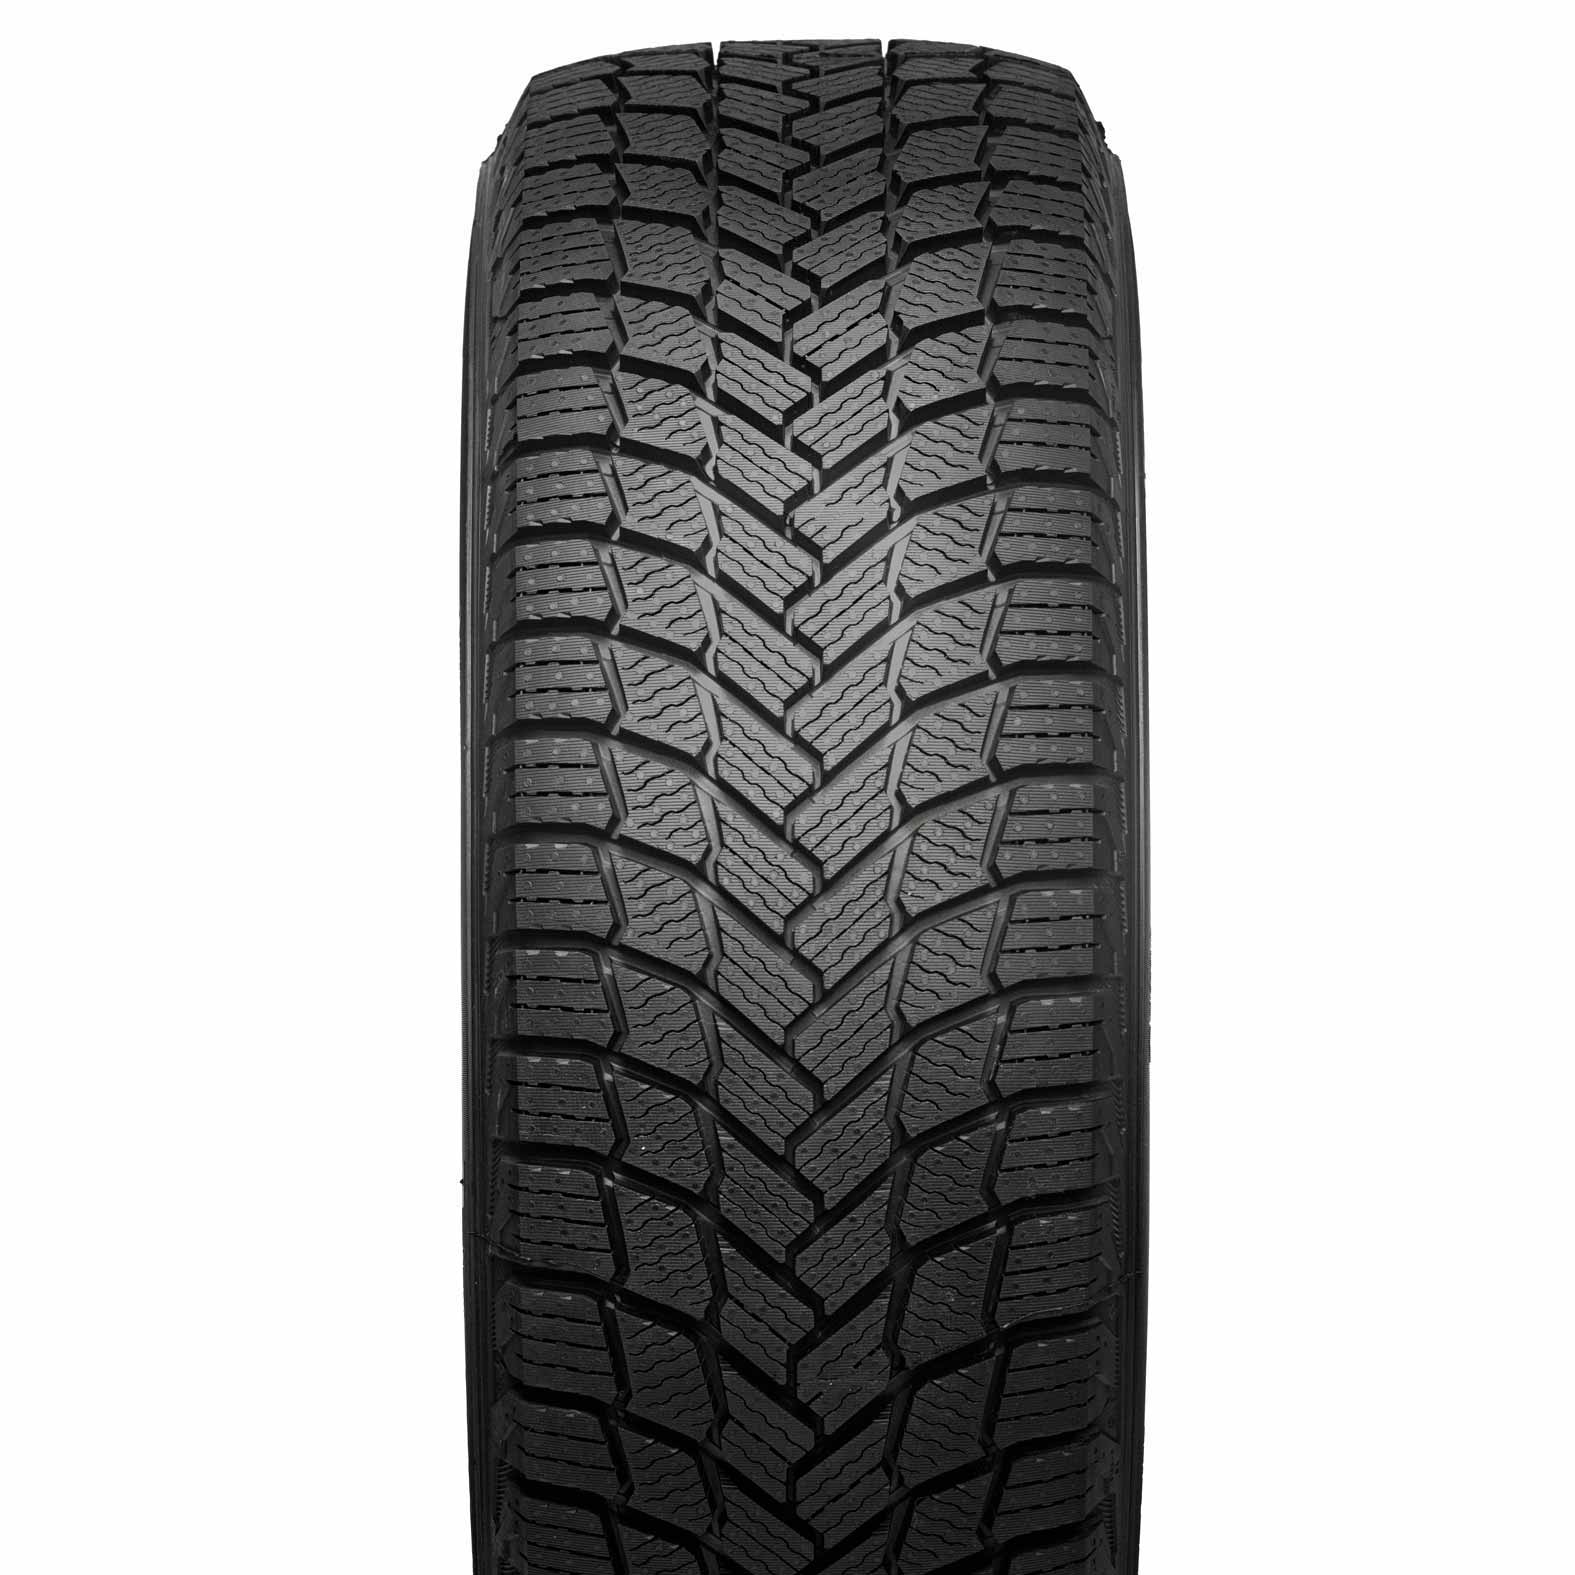 Michelin X-Ice Snow Winter Kal Tire | for Tire